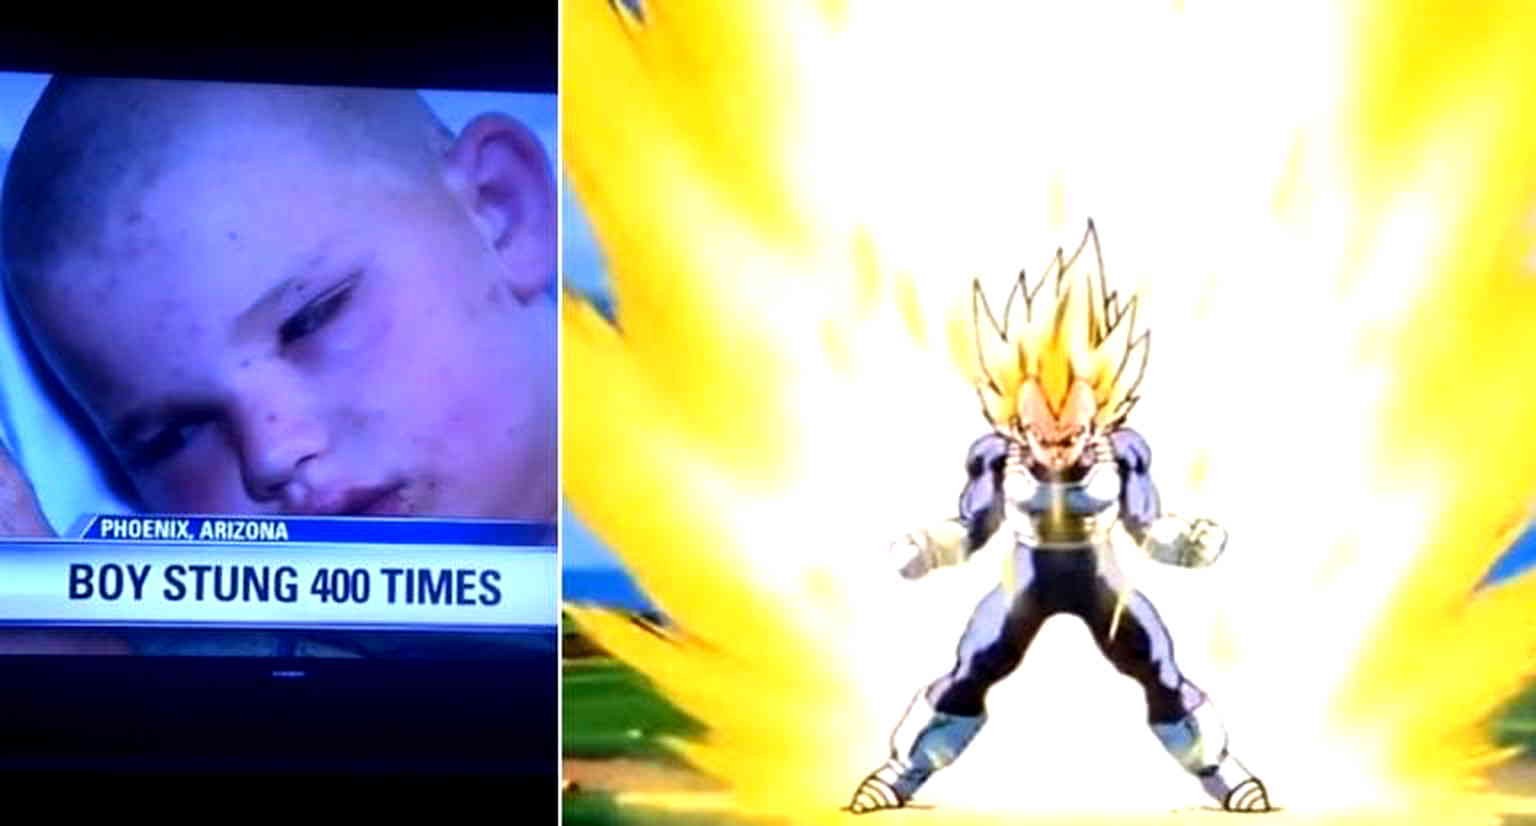 ‘I’m Andrew, but you can call me Vegeta’ Says Little Boy Stung 400 Times By Killer Bees